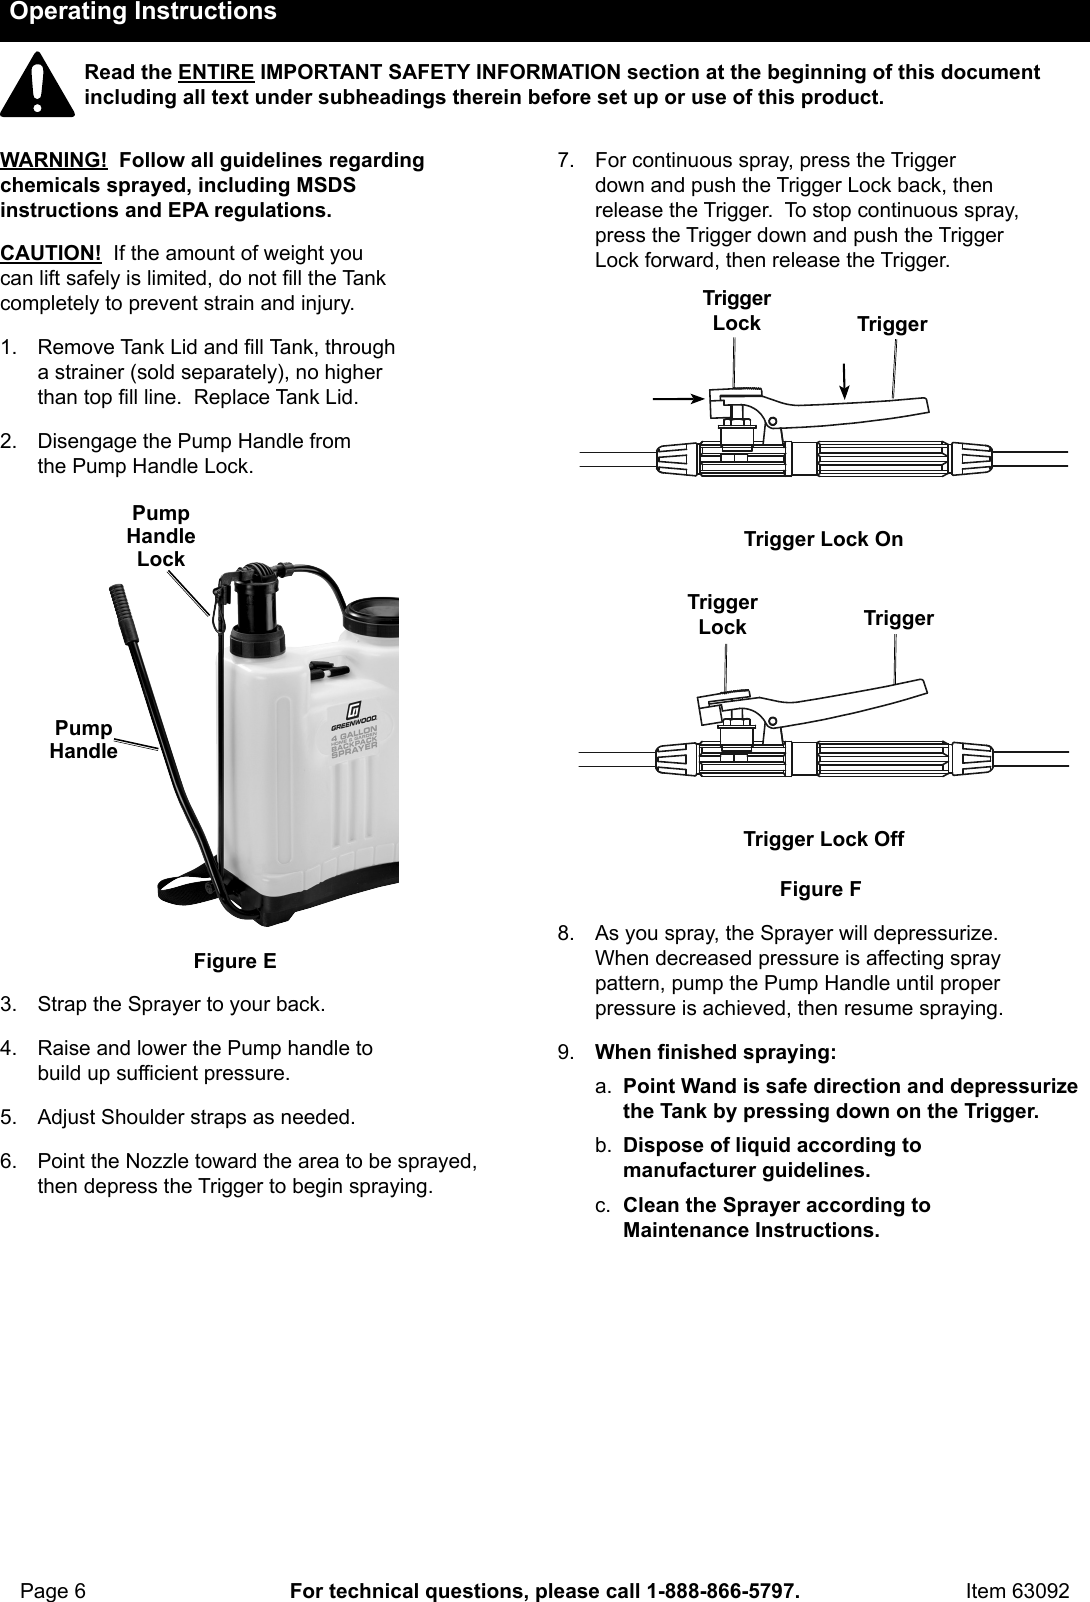 Page 6 of 12 - Manual For The 63092 4 Gal. Backpack Sprayer